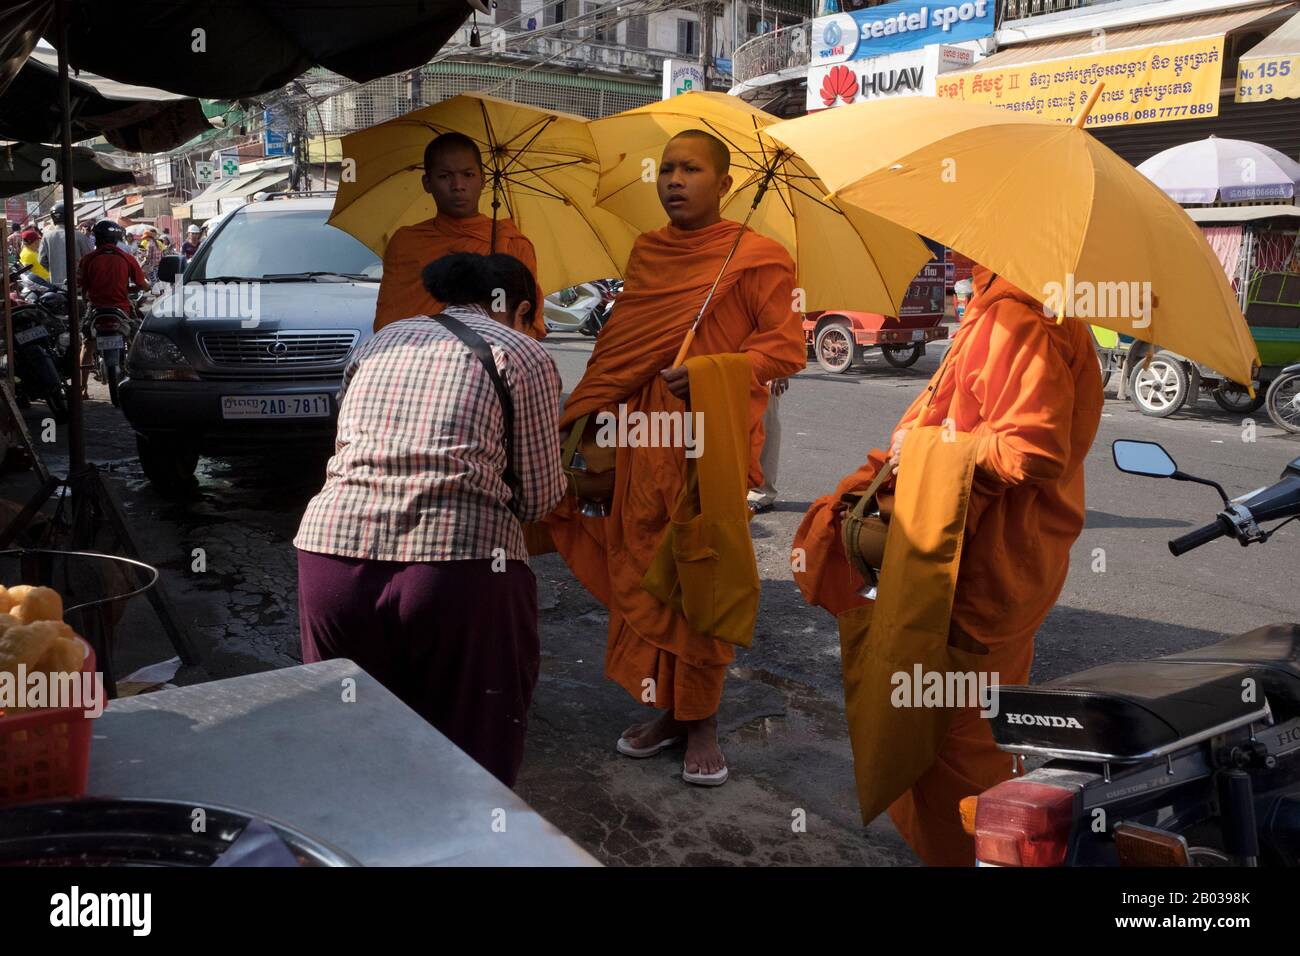 A woman receives blessings after offering money to monks on alms round in Kandal Market, Phnom Penh 2016. Stock Photo